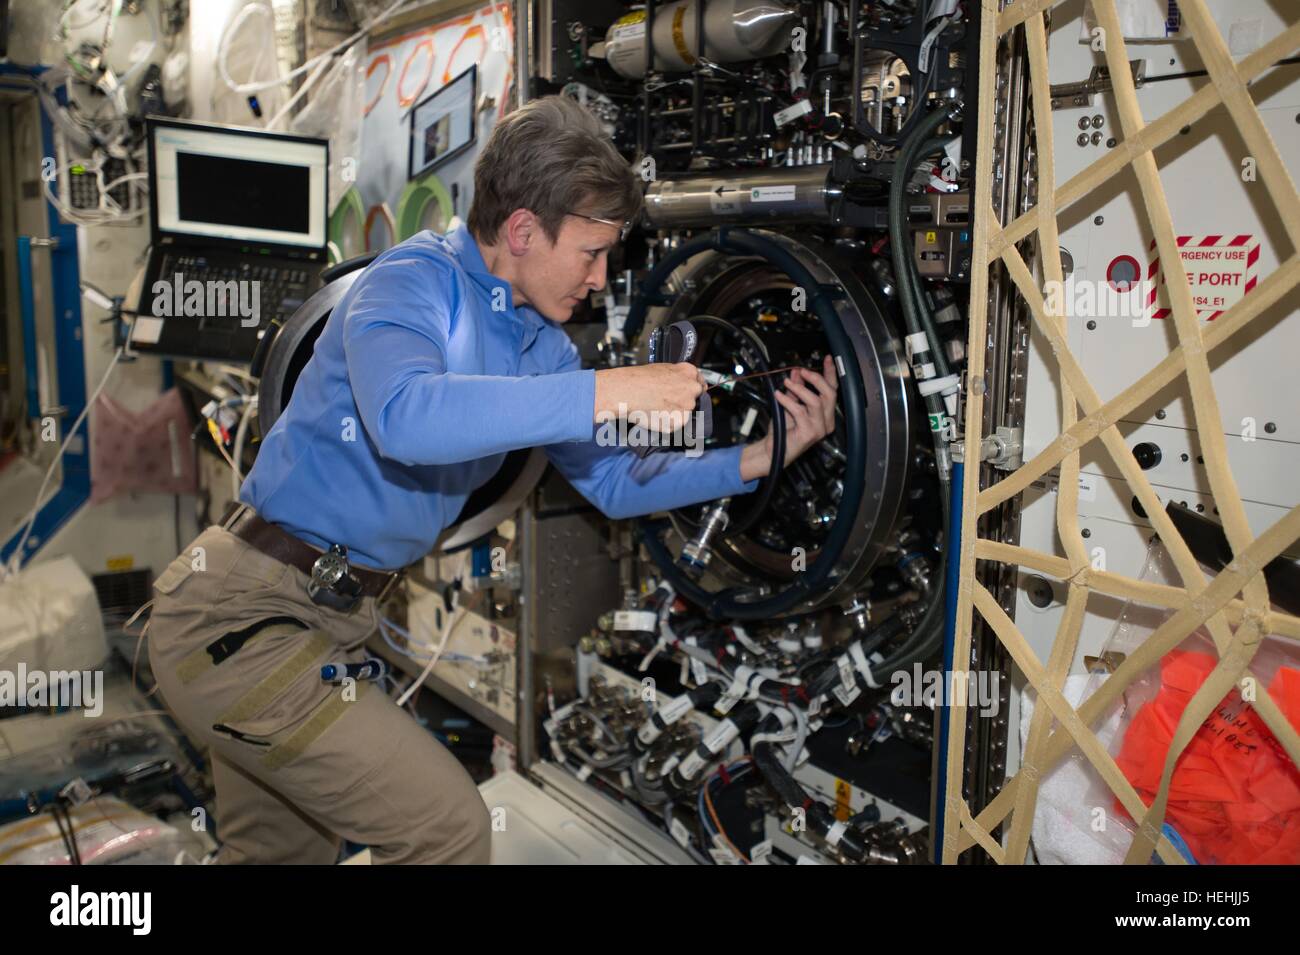 NASA Expedition 50 prime crew member astronaut Peggy Whitson troubleshoots the Combustion Integrated Rack aboard the International Space Station December 2, 2016 in Earth orbit. Stock Photo